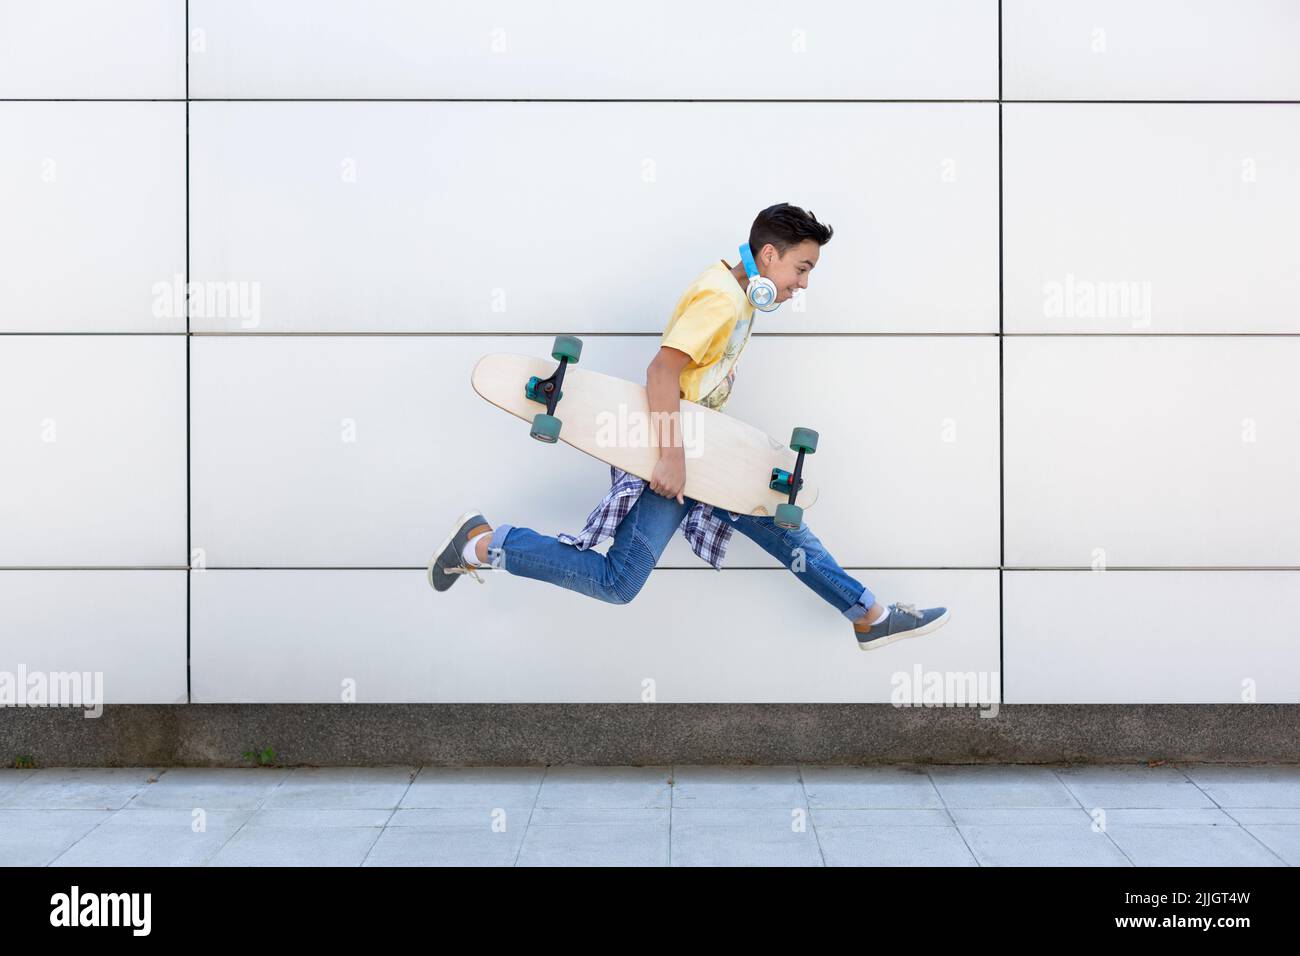 Caucasian teenage boy with longboard jumping. He is isolated on a wall. Urban lifestyle. Space for text. Stock Photo